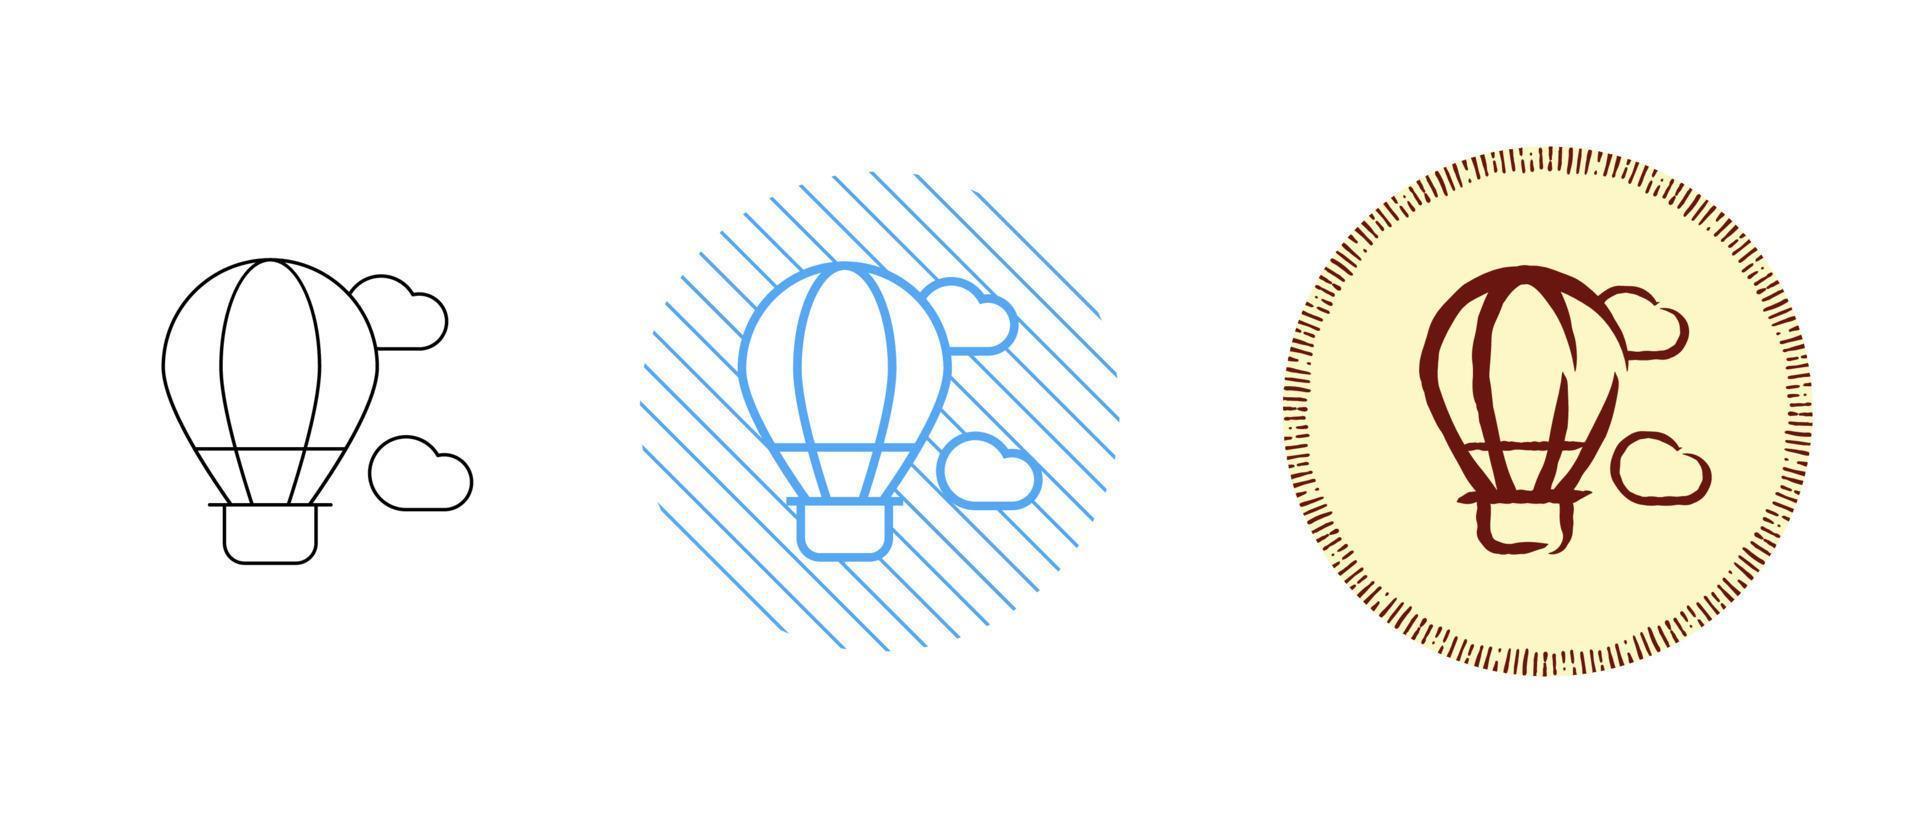 This is a set of contour and color hot air balloon icons vector